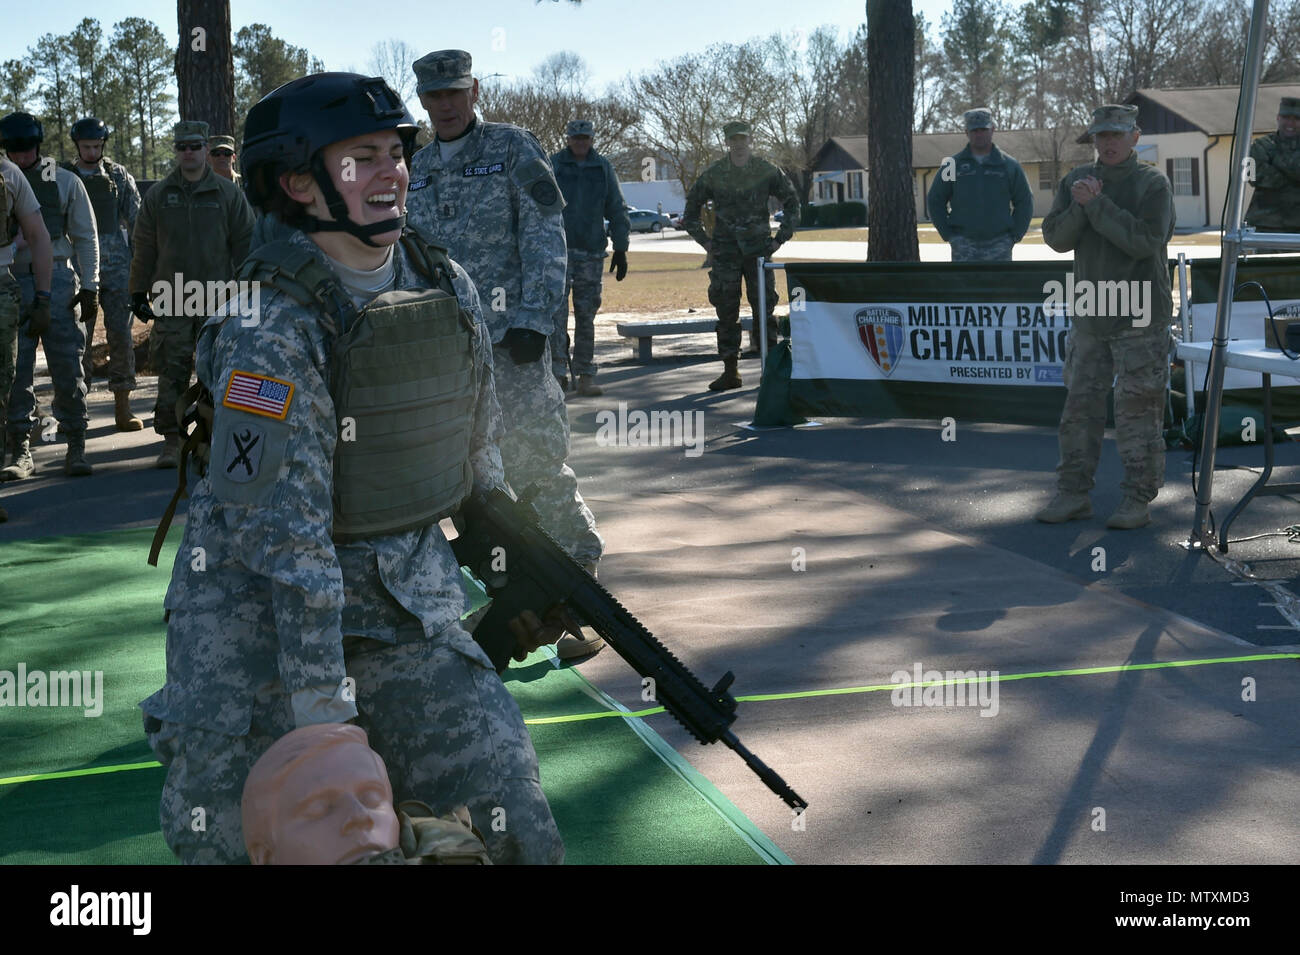 South Carolina Army National Guard Sgt. Rachel Clark, human resources non-commissioned officer with the 218th Leadership Regiment, runs through the 'Battle Challenge' during the 2017 Best Warrior Competition at McCrady Training Center in Eastover, S.C., Jan 30, 2017. The Battle Challenge is a mobile obstacle course requiring participants to perform nine tasks under pressure of time, including a cargo net climb, a knotted rope descent, wall surmount, ammunition resupply, low crawl, gas can carry, marksmanship tasks, and a service member-down rescue. The event was open to all military service me Stock Photo